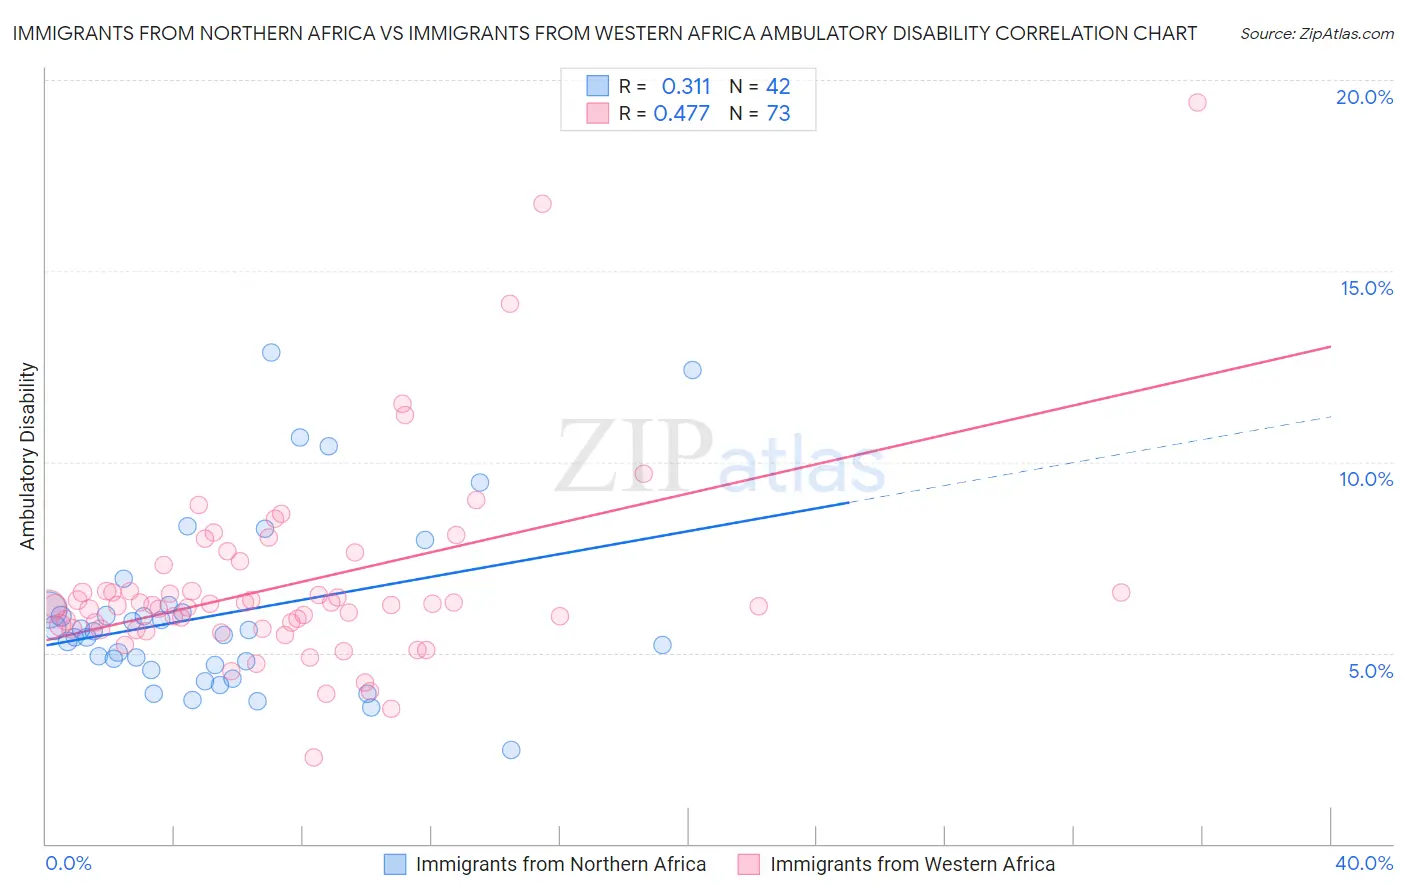 Immigrants from Northern Africa vs Immigrants from Western Africa Ambulatory Disability